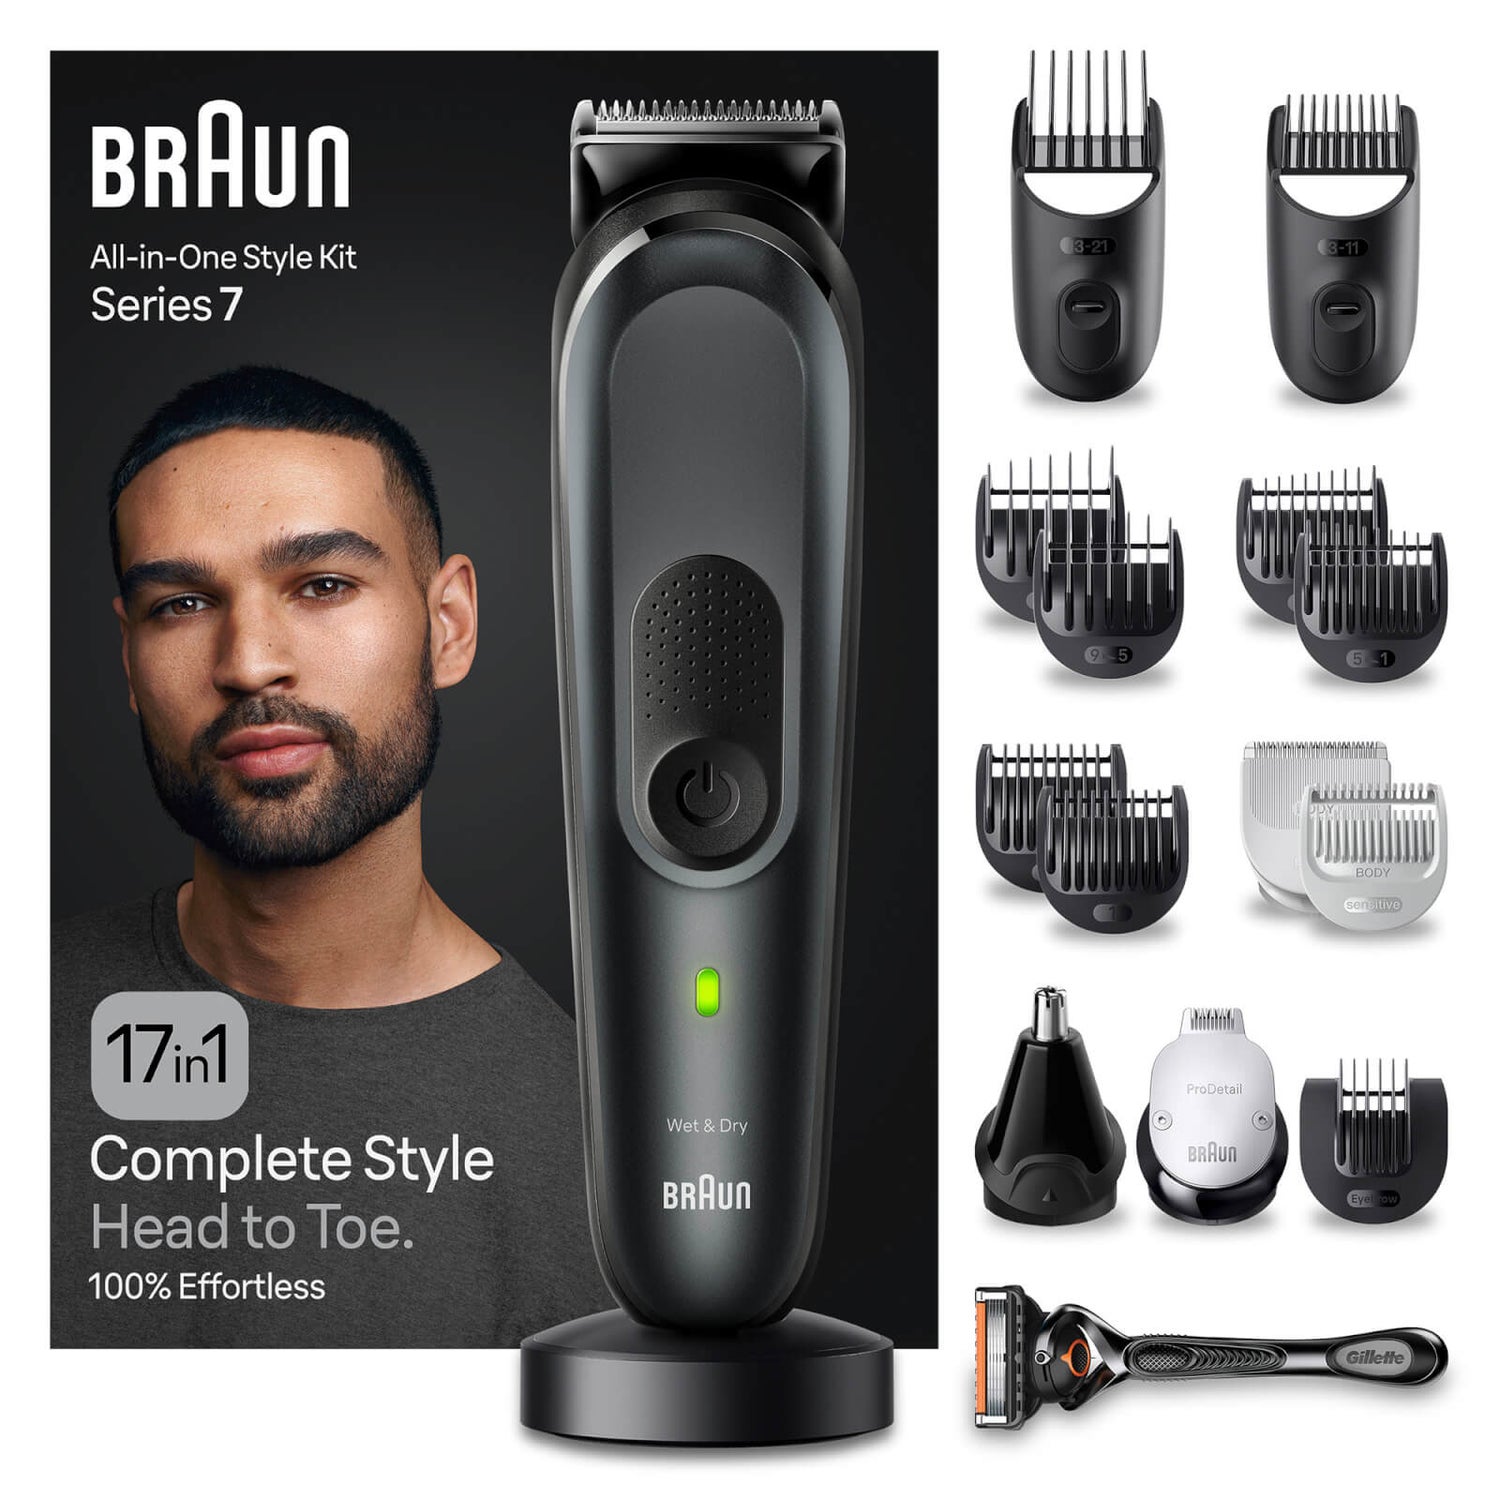 Braun All-In-One Style Kit Series 7 MGK7491, 17-in1 Kit For Beard, Hair, Manscaping & More